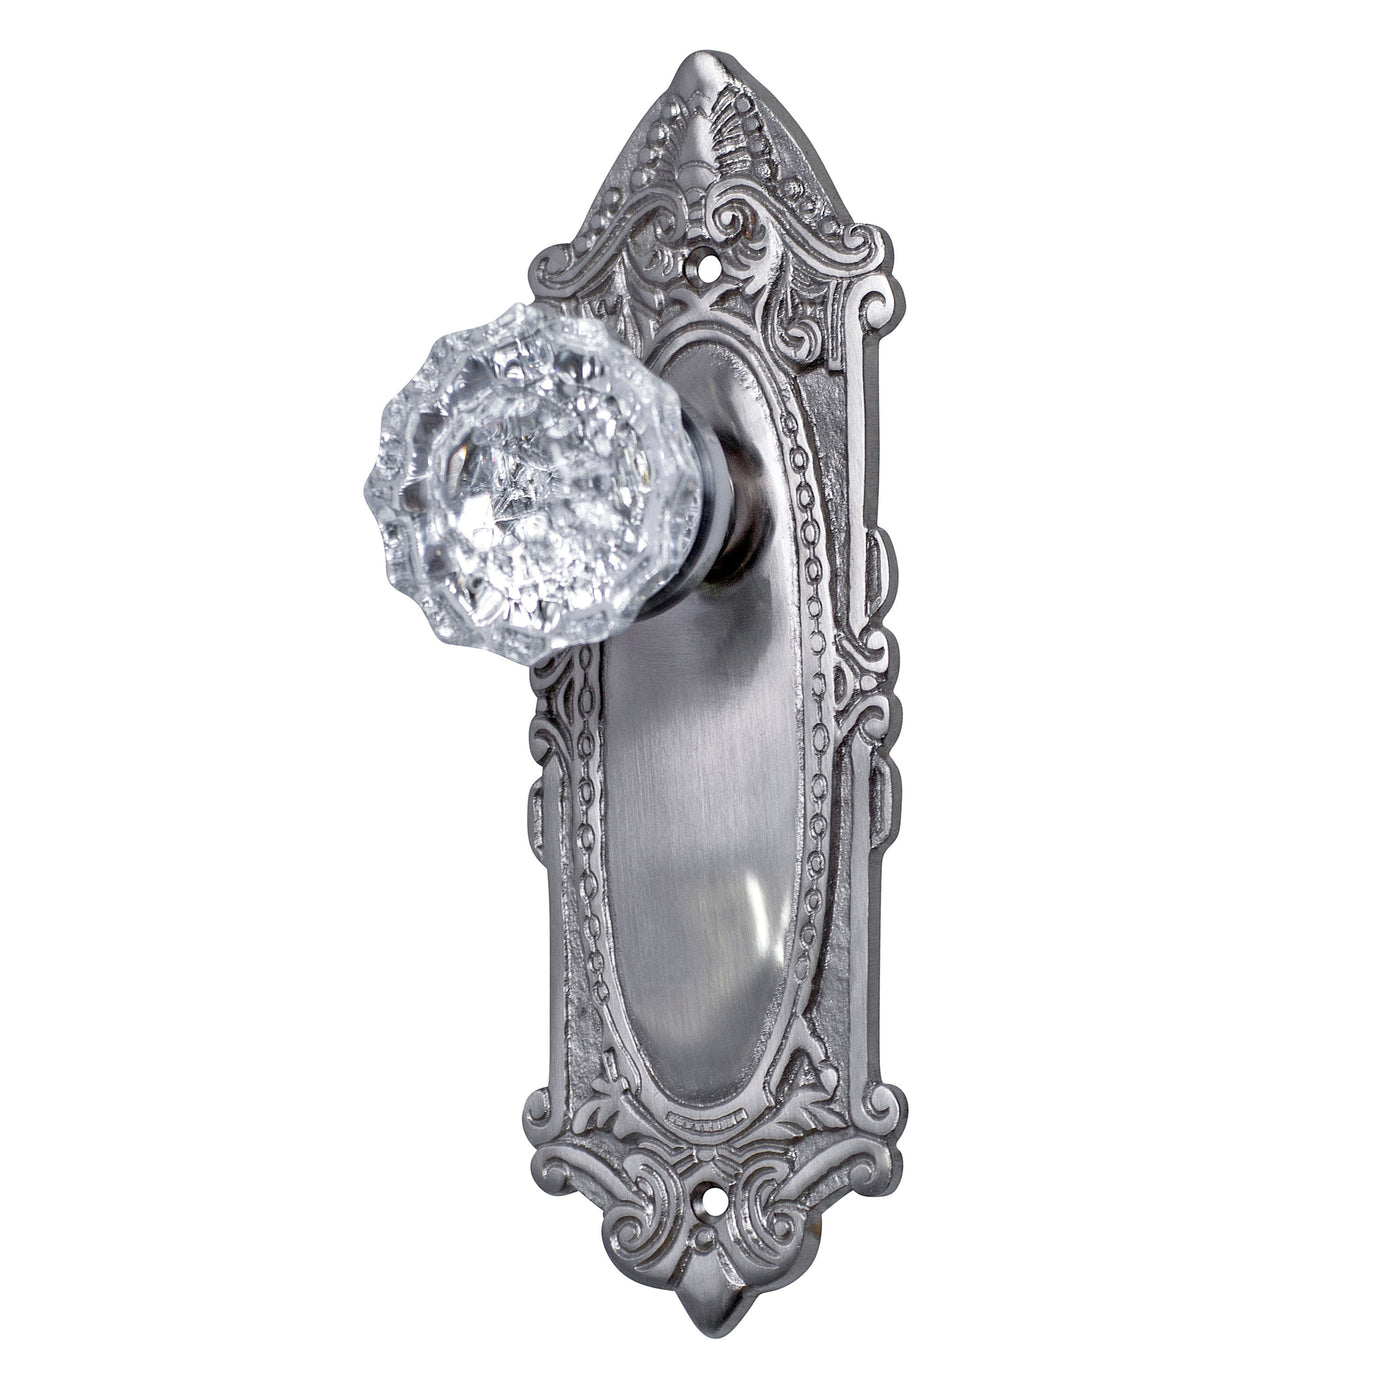 Ornate Victorian Long Backplate Door Set with Crystal Fluted Door Knobs (Several Finishes Available)